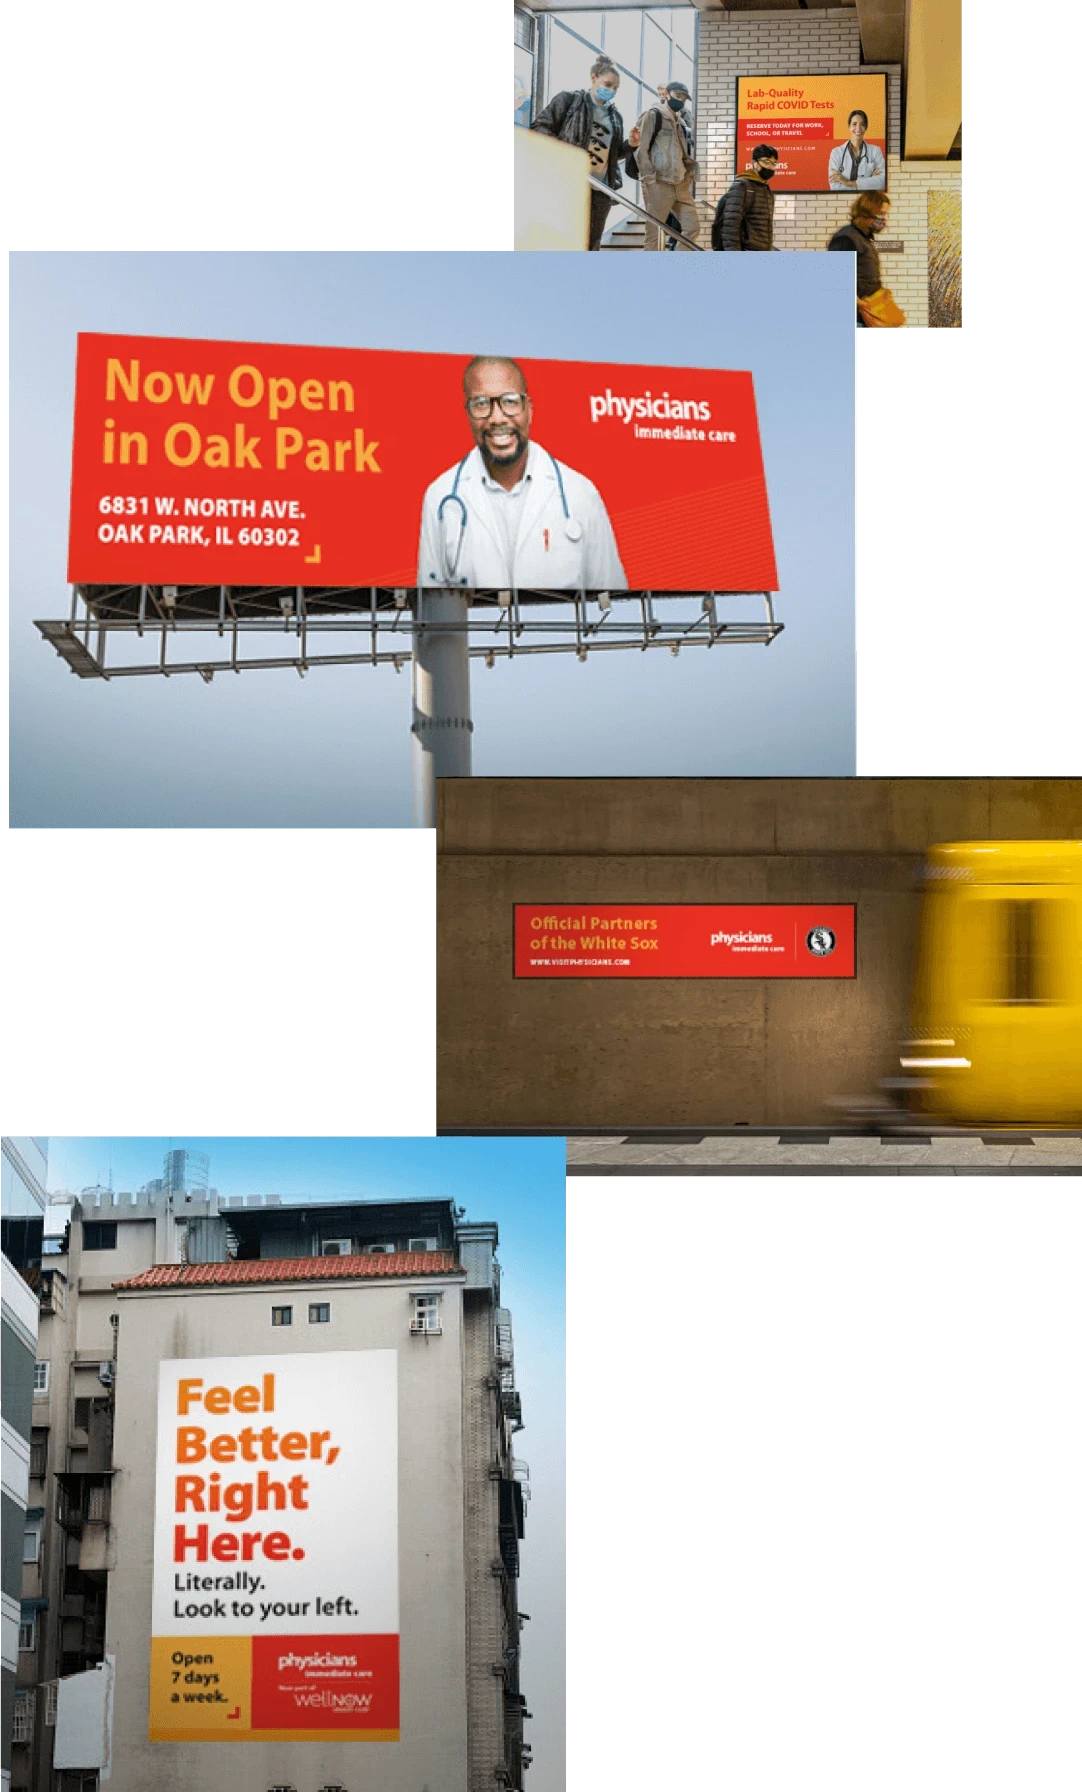 Out-of-home advertisements for Physicians Immediate Care and WellNow Urgent Care in various settings: a stairwell, a billboard, a subway wall, and on the side of a building.